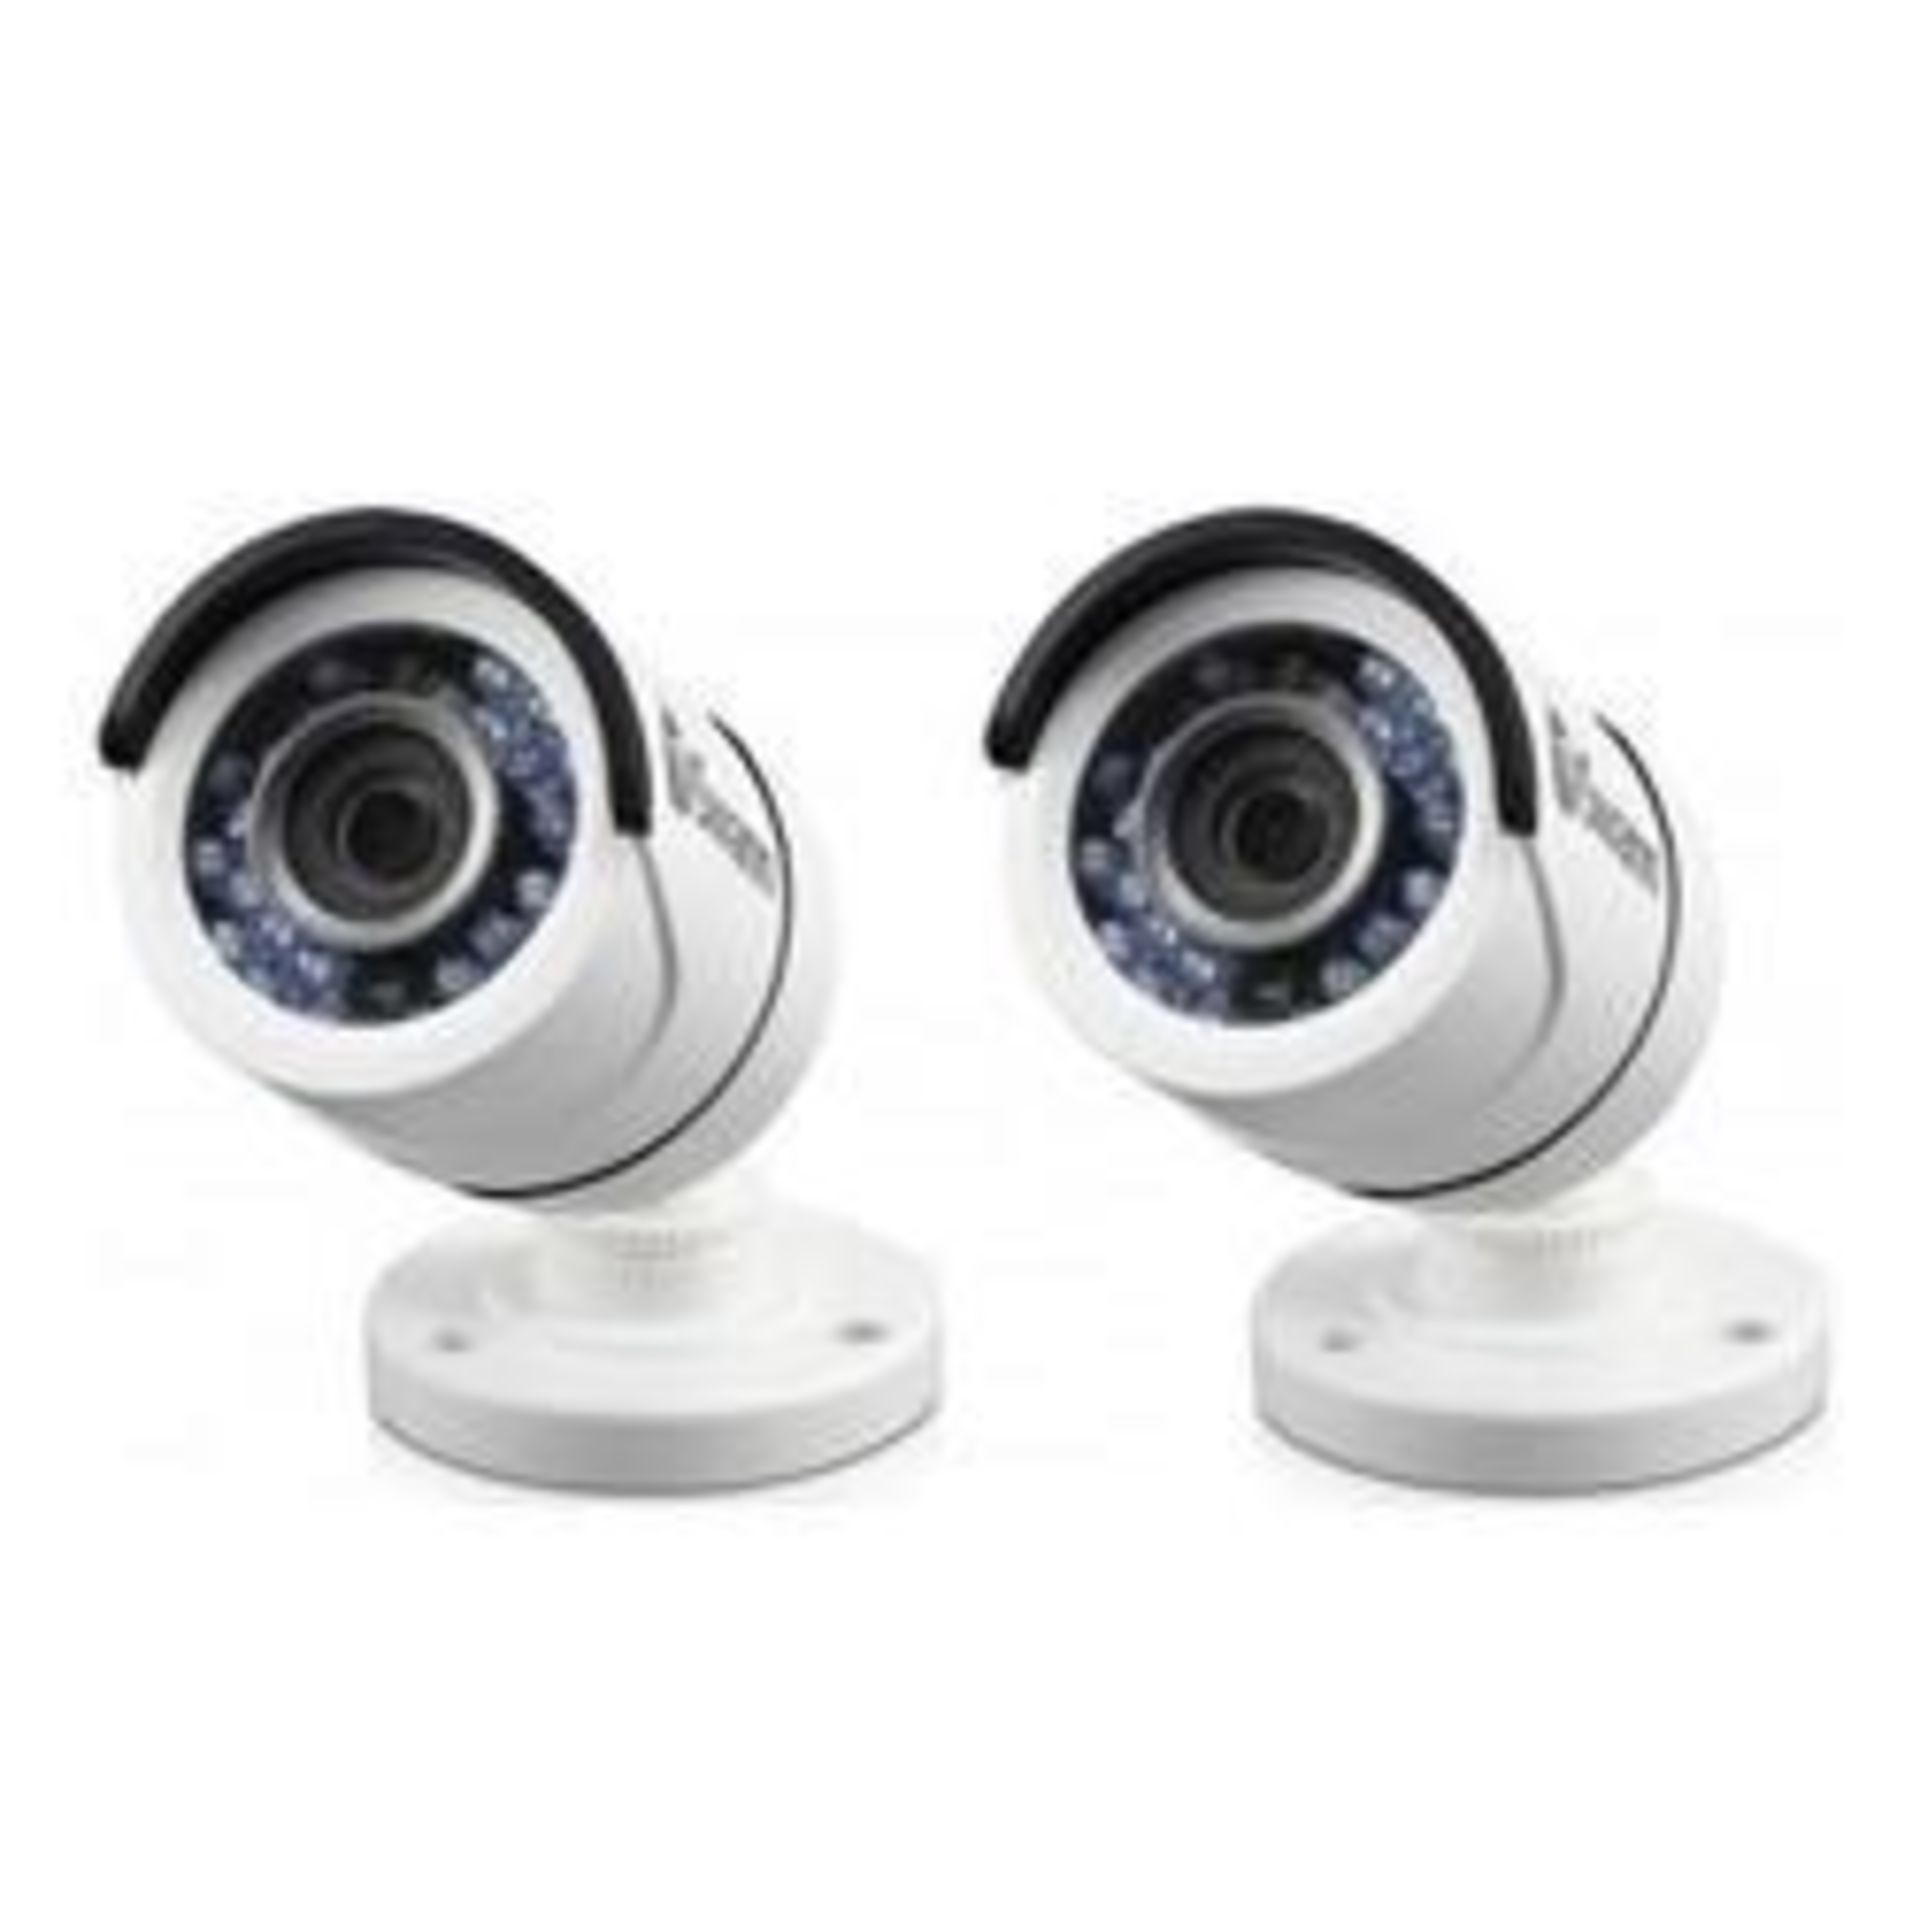 V *TRADE QTY* Grade A Swann Pro-T853 Pack of Two 1080P HD Bullet Cameras - 30 Meter Night Vision -